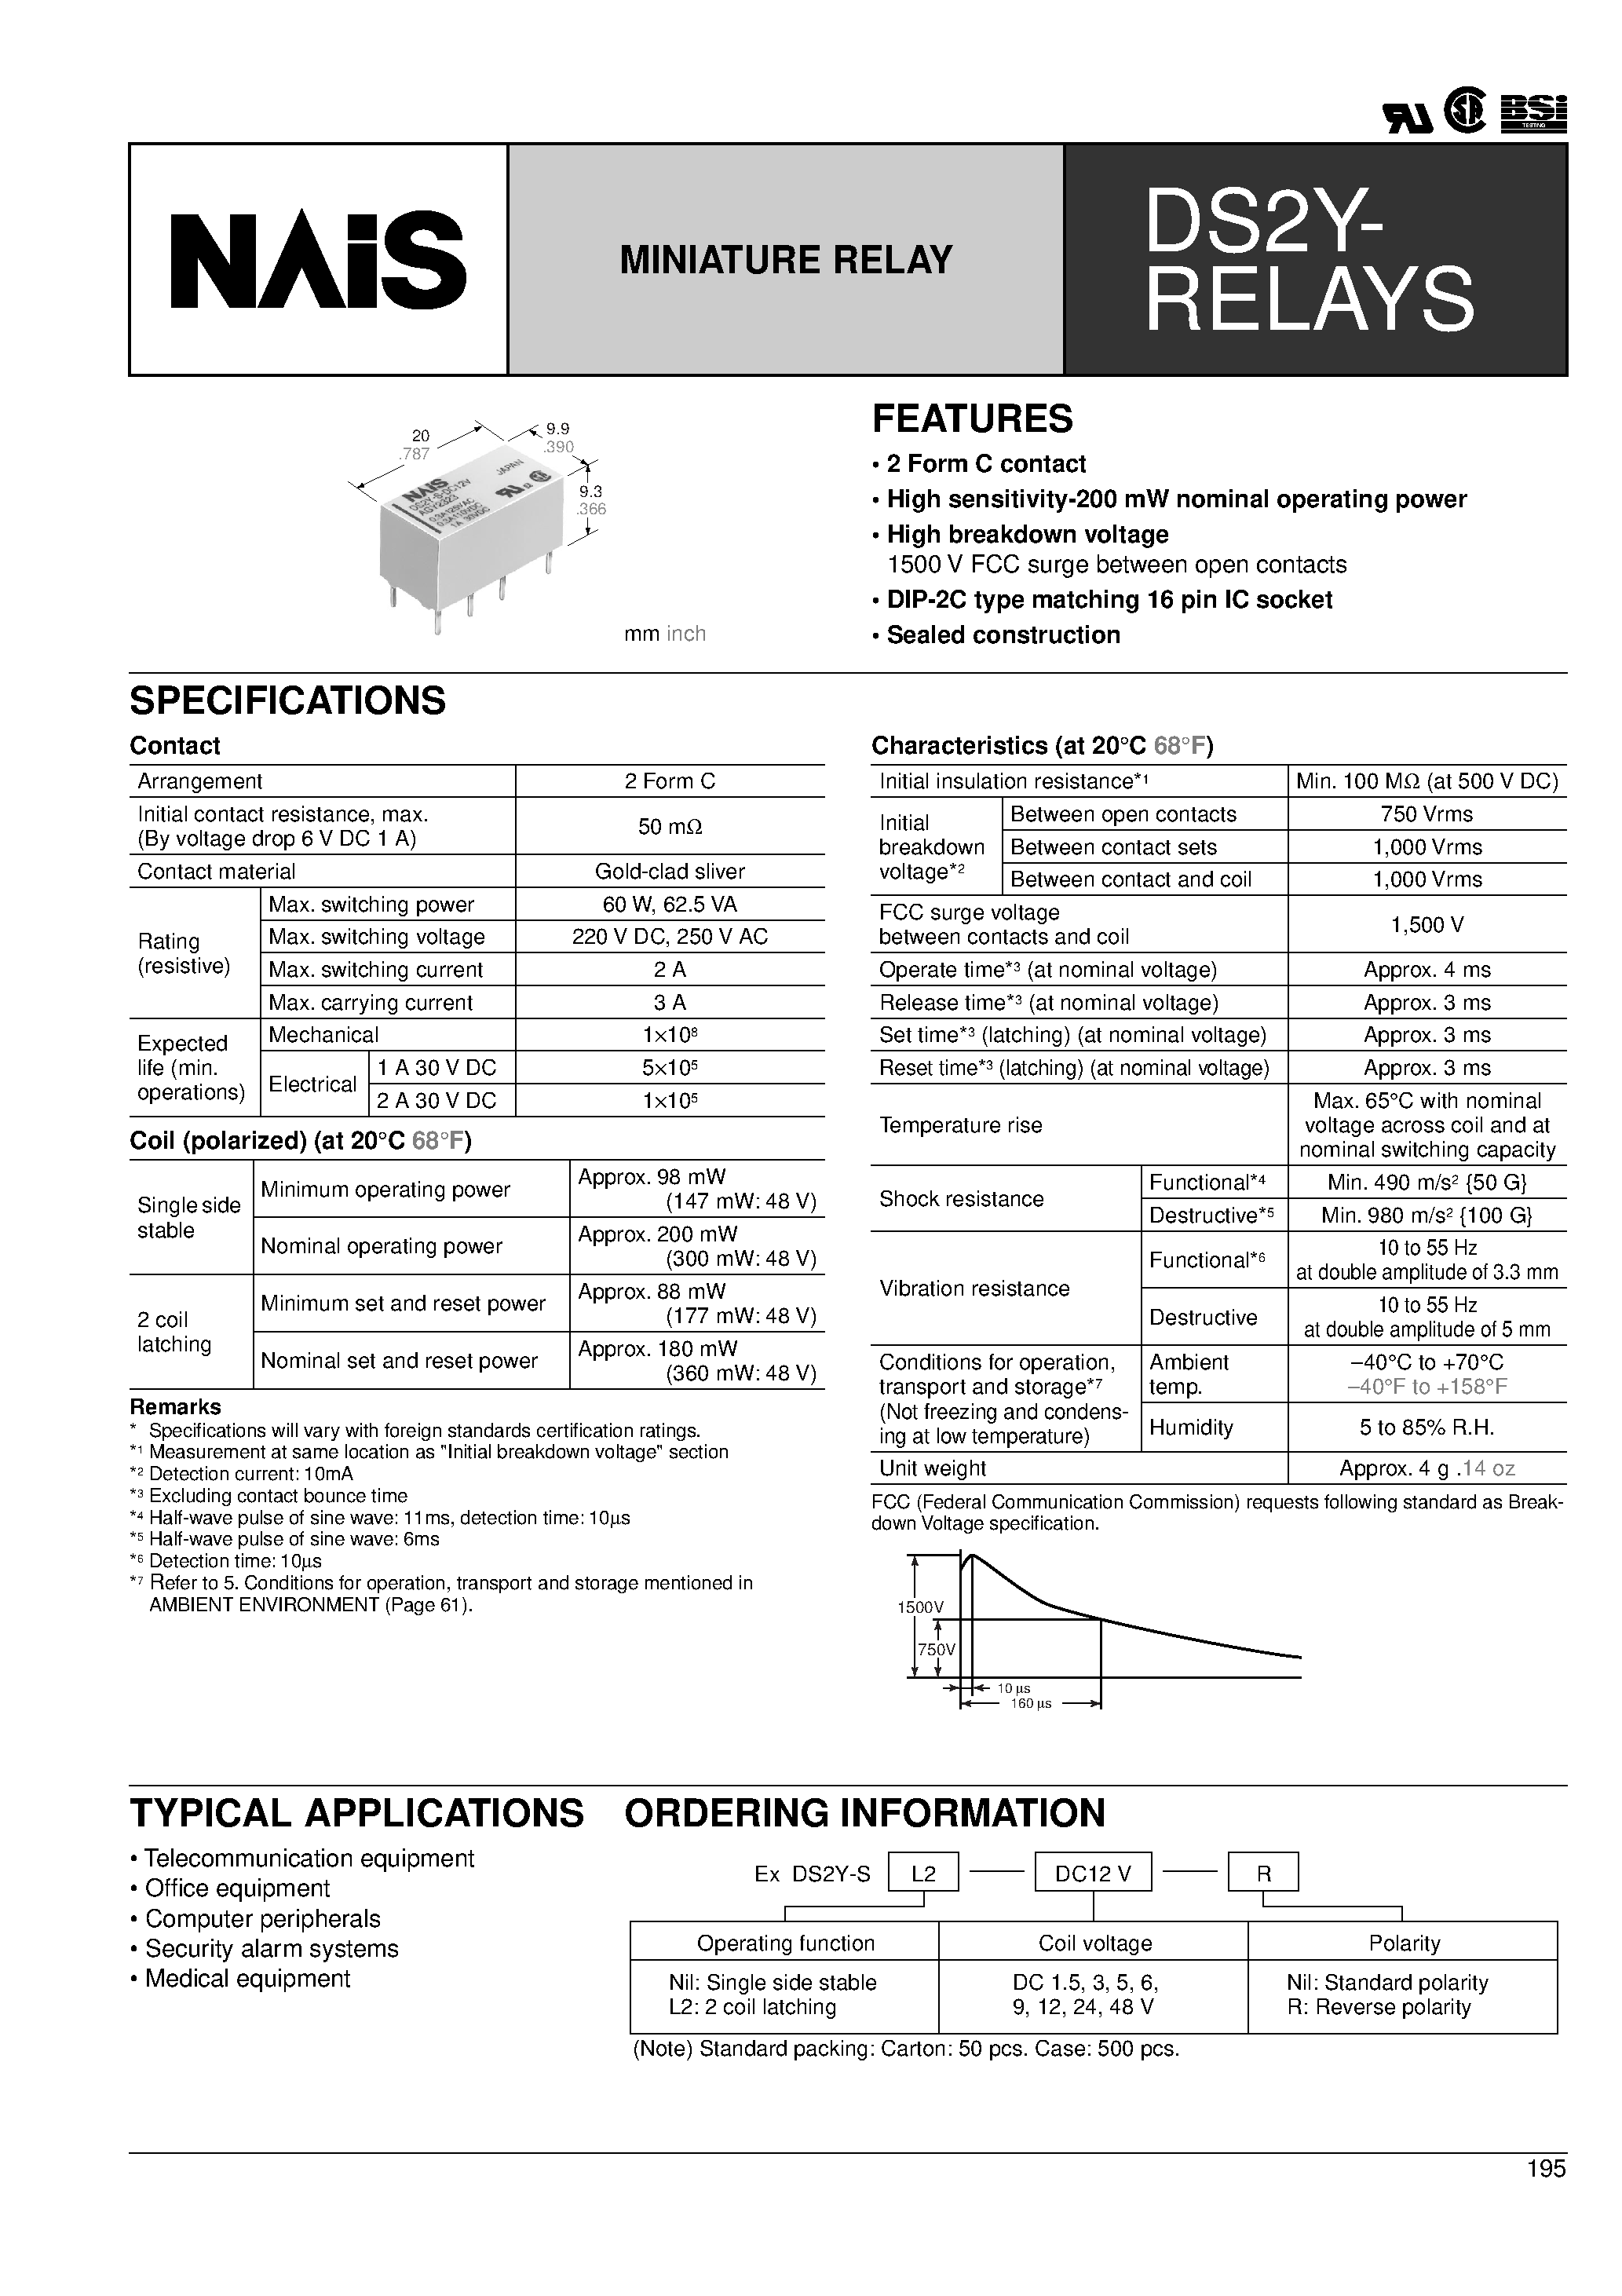 Datasheet DS2Y-S-DC12V - 2 Form C contact High sensitivity-200 mW nominal operating power page 1